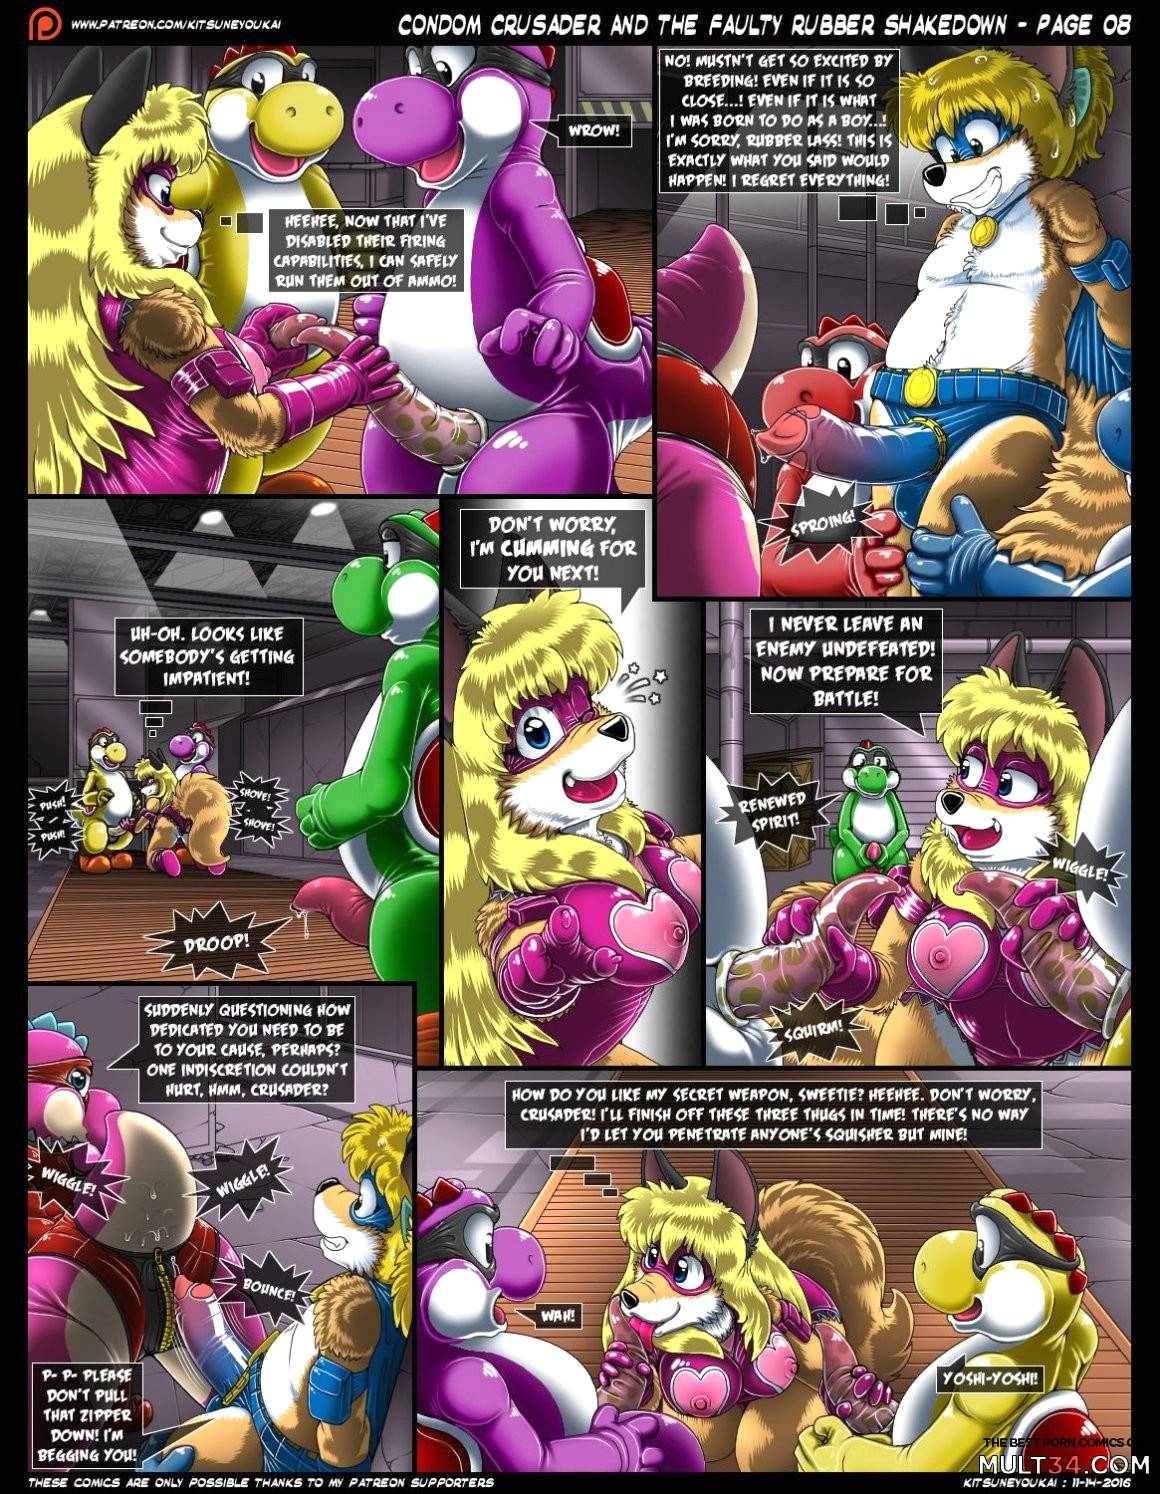 Condom Crusader And The Faulty Rubber Shakedown page 9